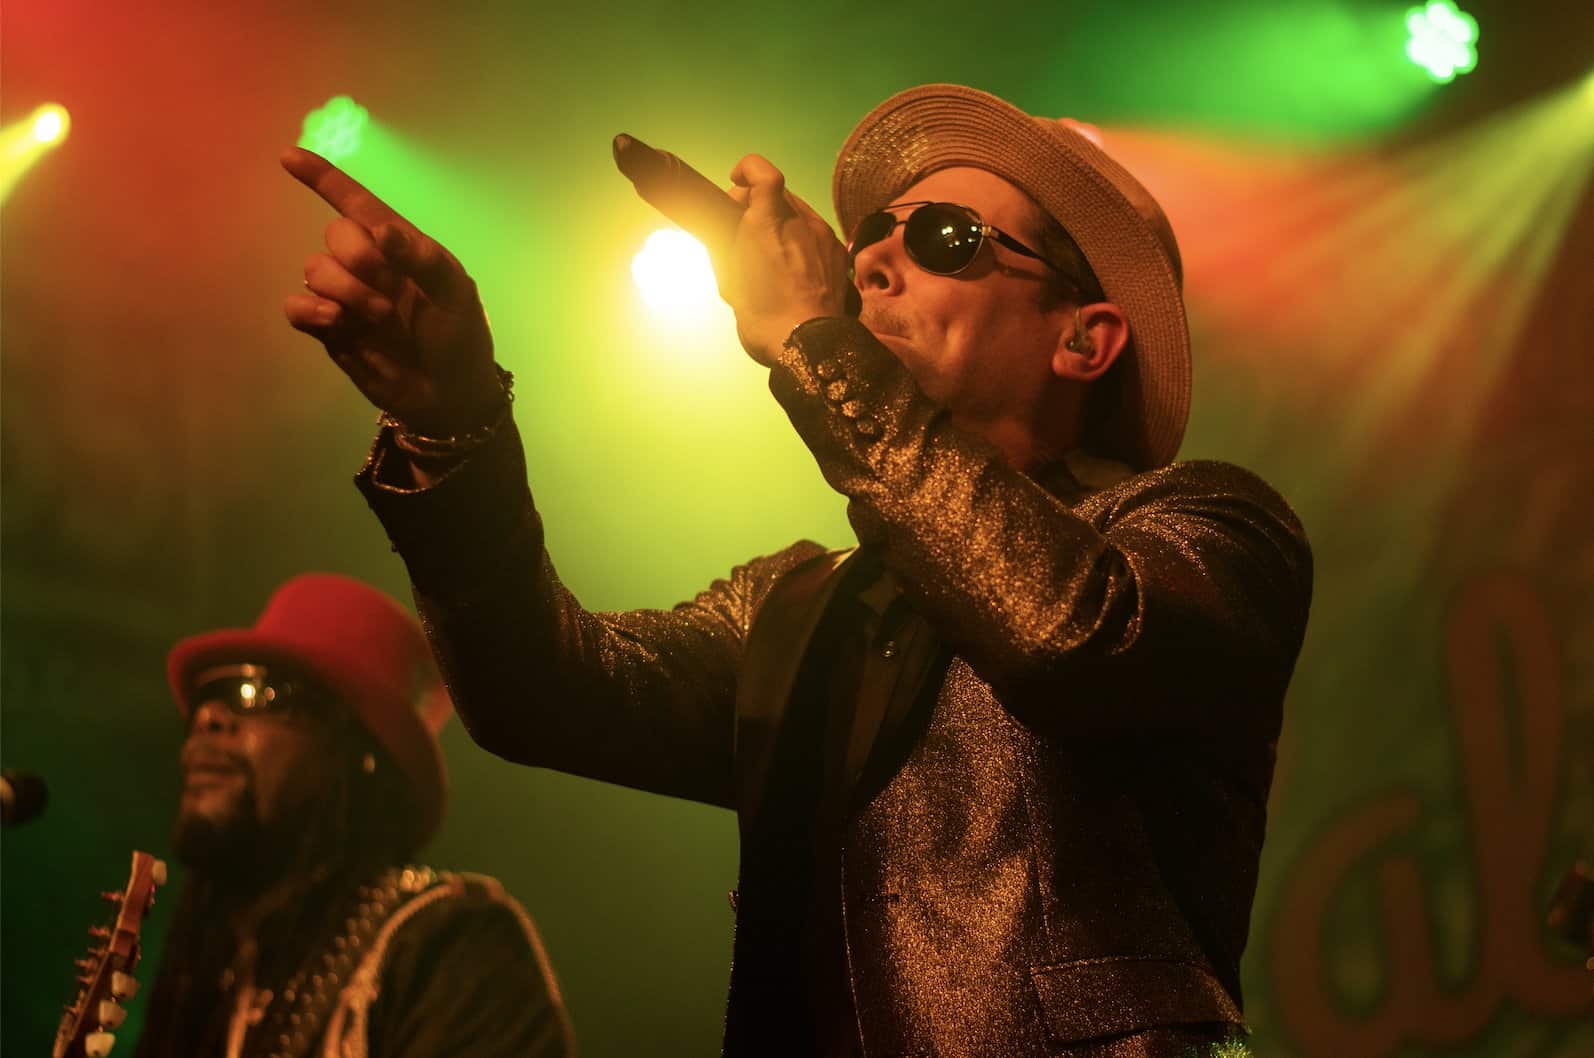 Tyber and Pete of The Dualers will be playing an 'intimate' gig (Image: The Dualers / Twitter)